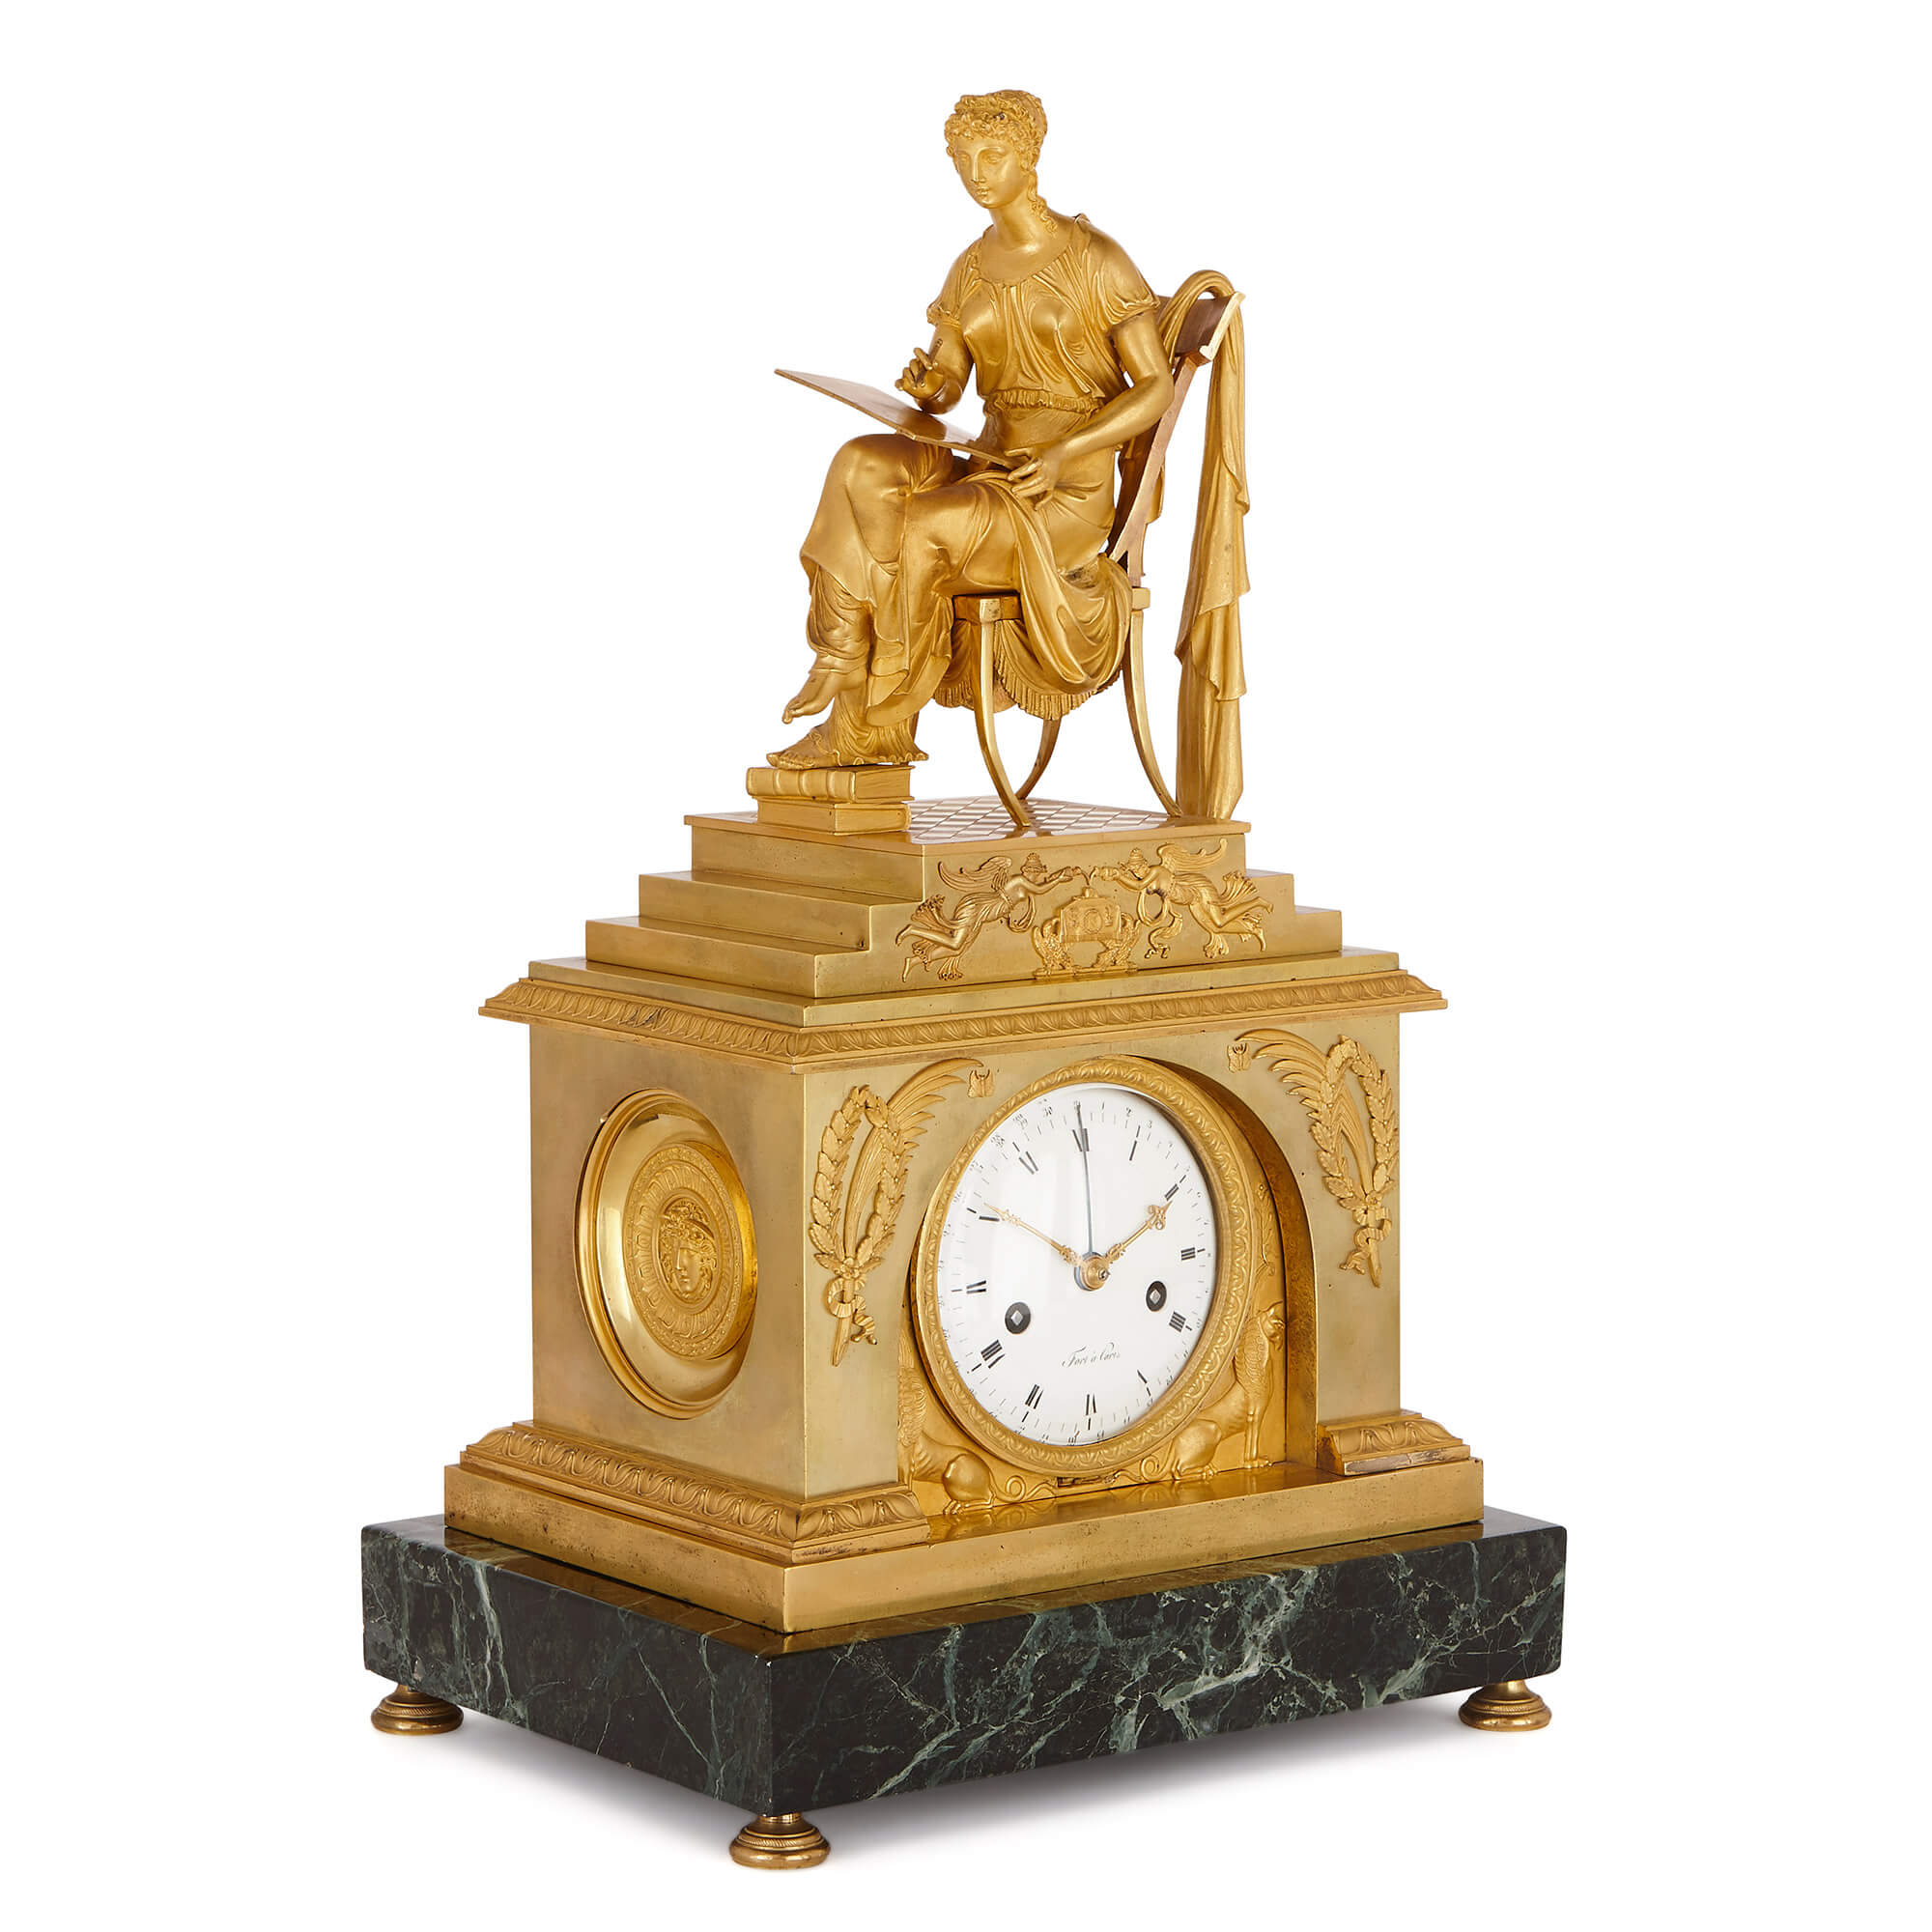 French Empire Period Ormolu And Marble Mantel Clock By Fort Mayfair Gallery The clock case is surmounted by the seated figure of an indian with a bow in one hand and a spear in the other, resting her feet on the head of an it has pierced gilt hands and a beaded ormolu border. french empire period ormolu and marble